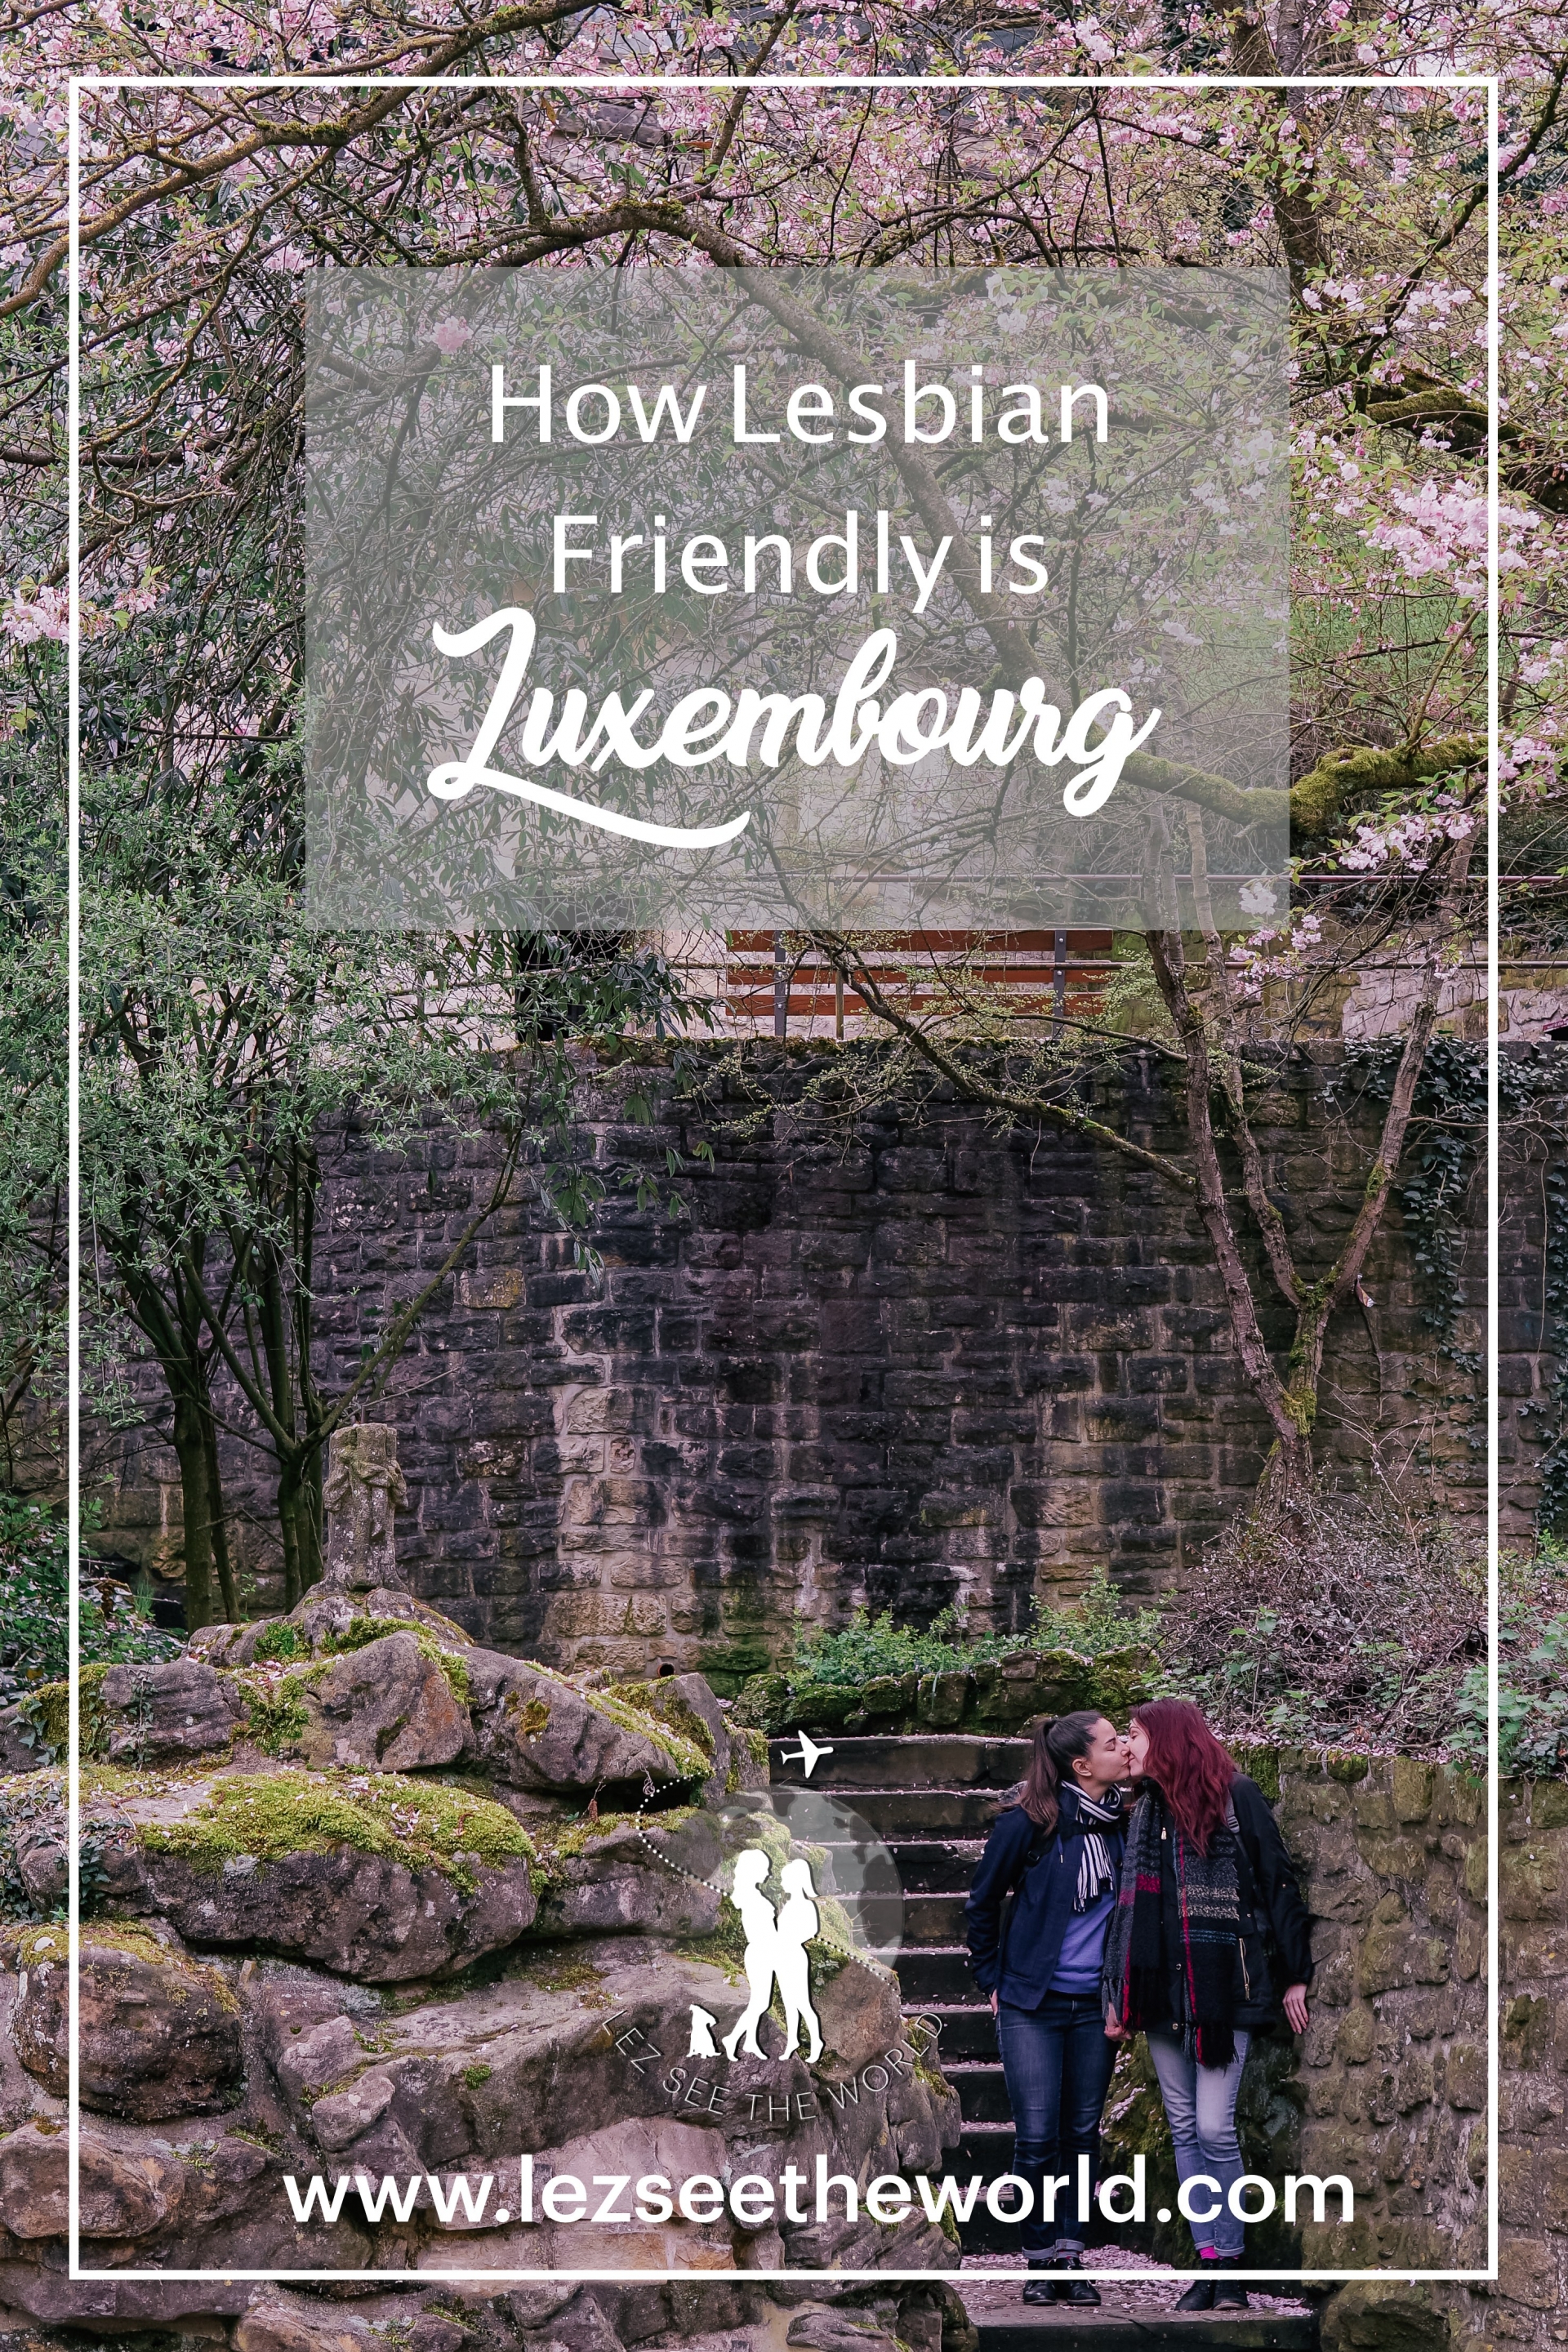 How Lesbian Friendly is Luxembourg